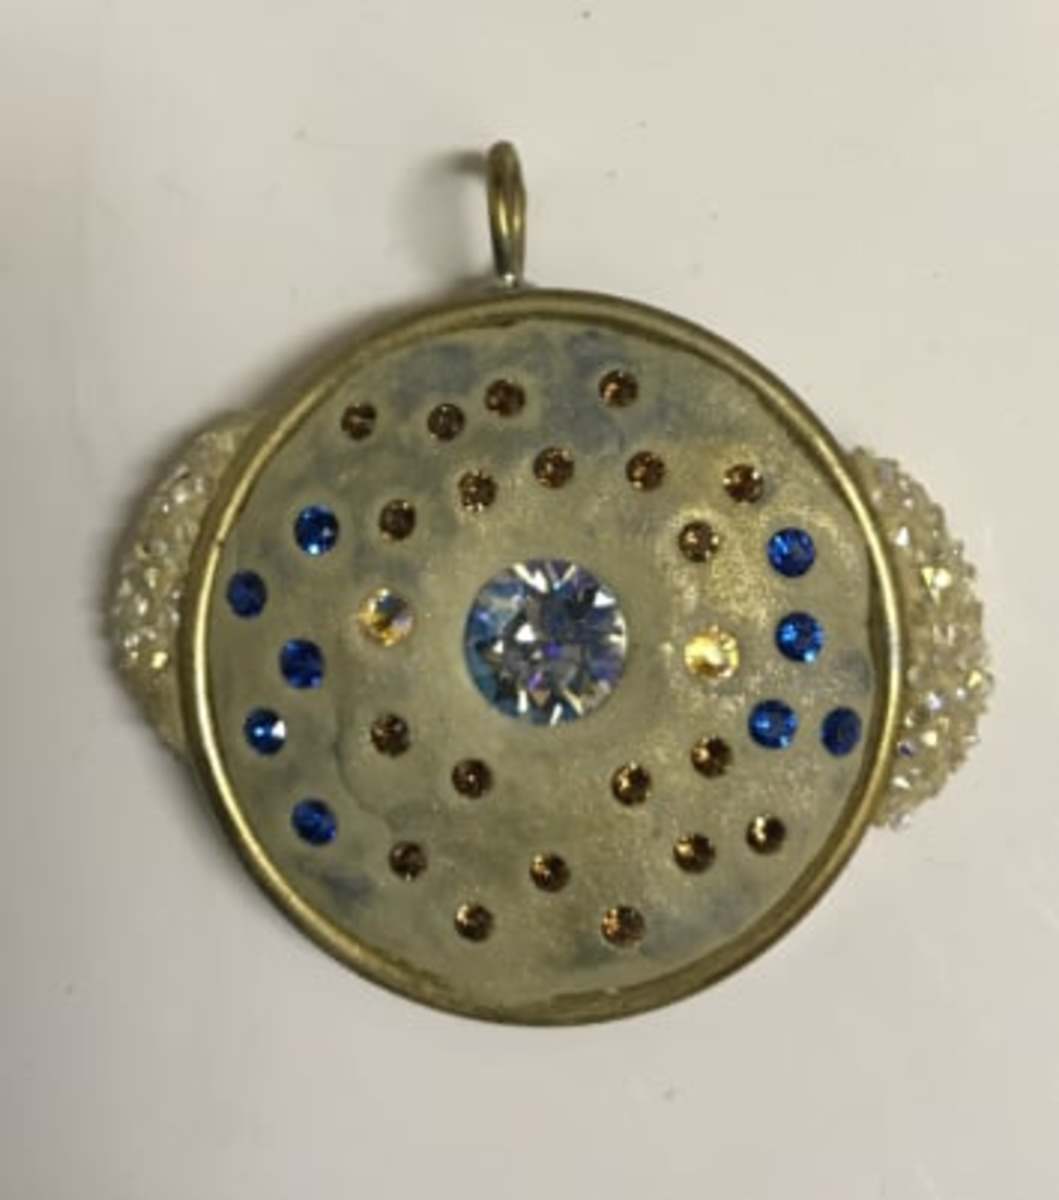 On this pendant - with the bezel filled with clay, chatons embedded, and mica powder brushed on - I attached nail caviar-dipped pieces of fresh clay on the sides. 